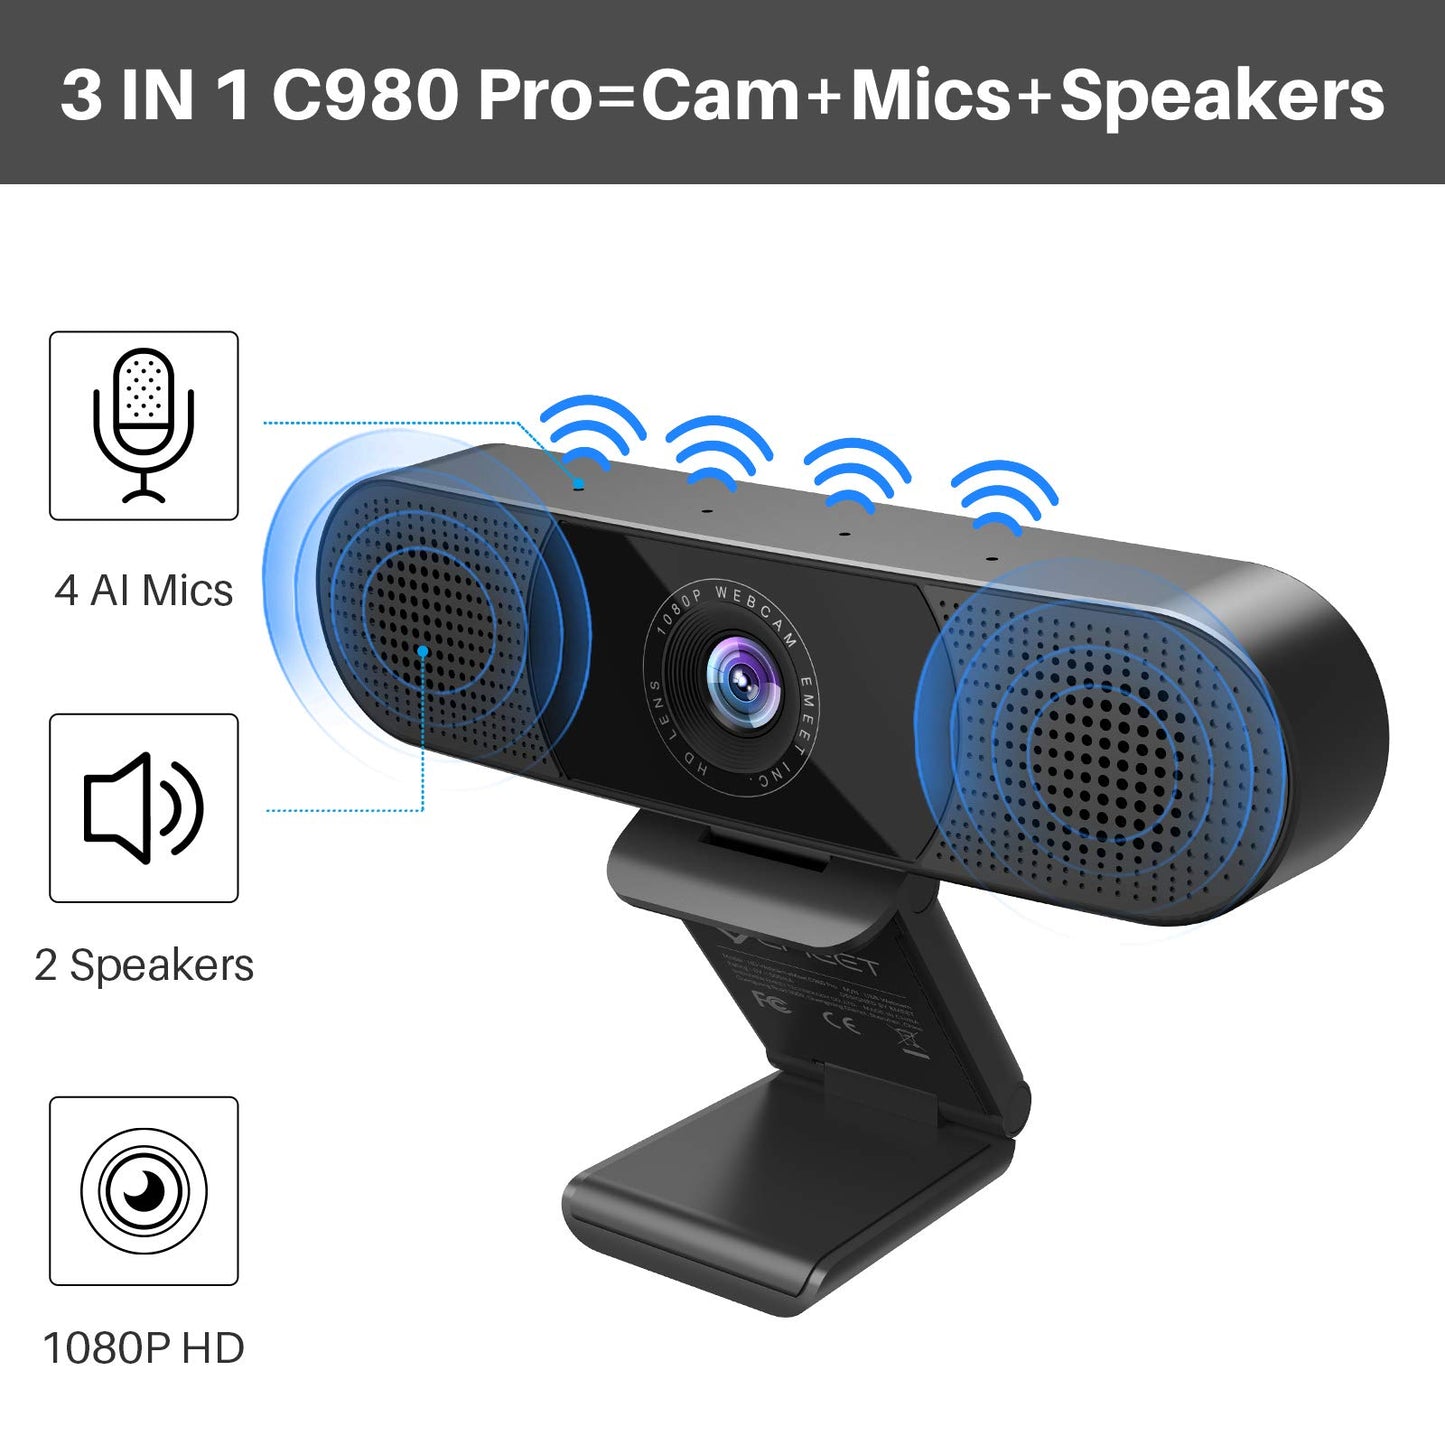 3 in 1 Webcam - 1080P Webcam with Microphone and Speakers, Noise Reduction, Auto Low Light Correction W/Cover, EMEET C980 Pro USB Camera Webcam 90° for Video Conferencing Streaming/Gaming/Class